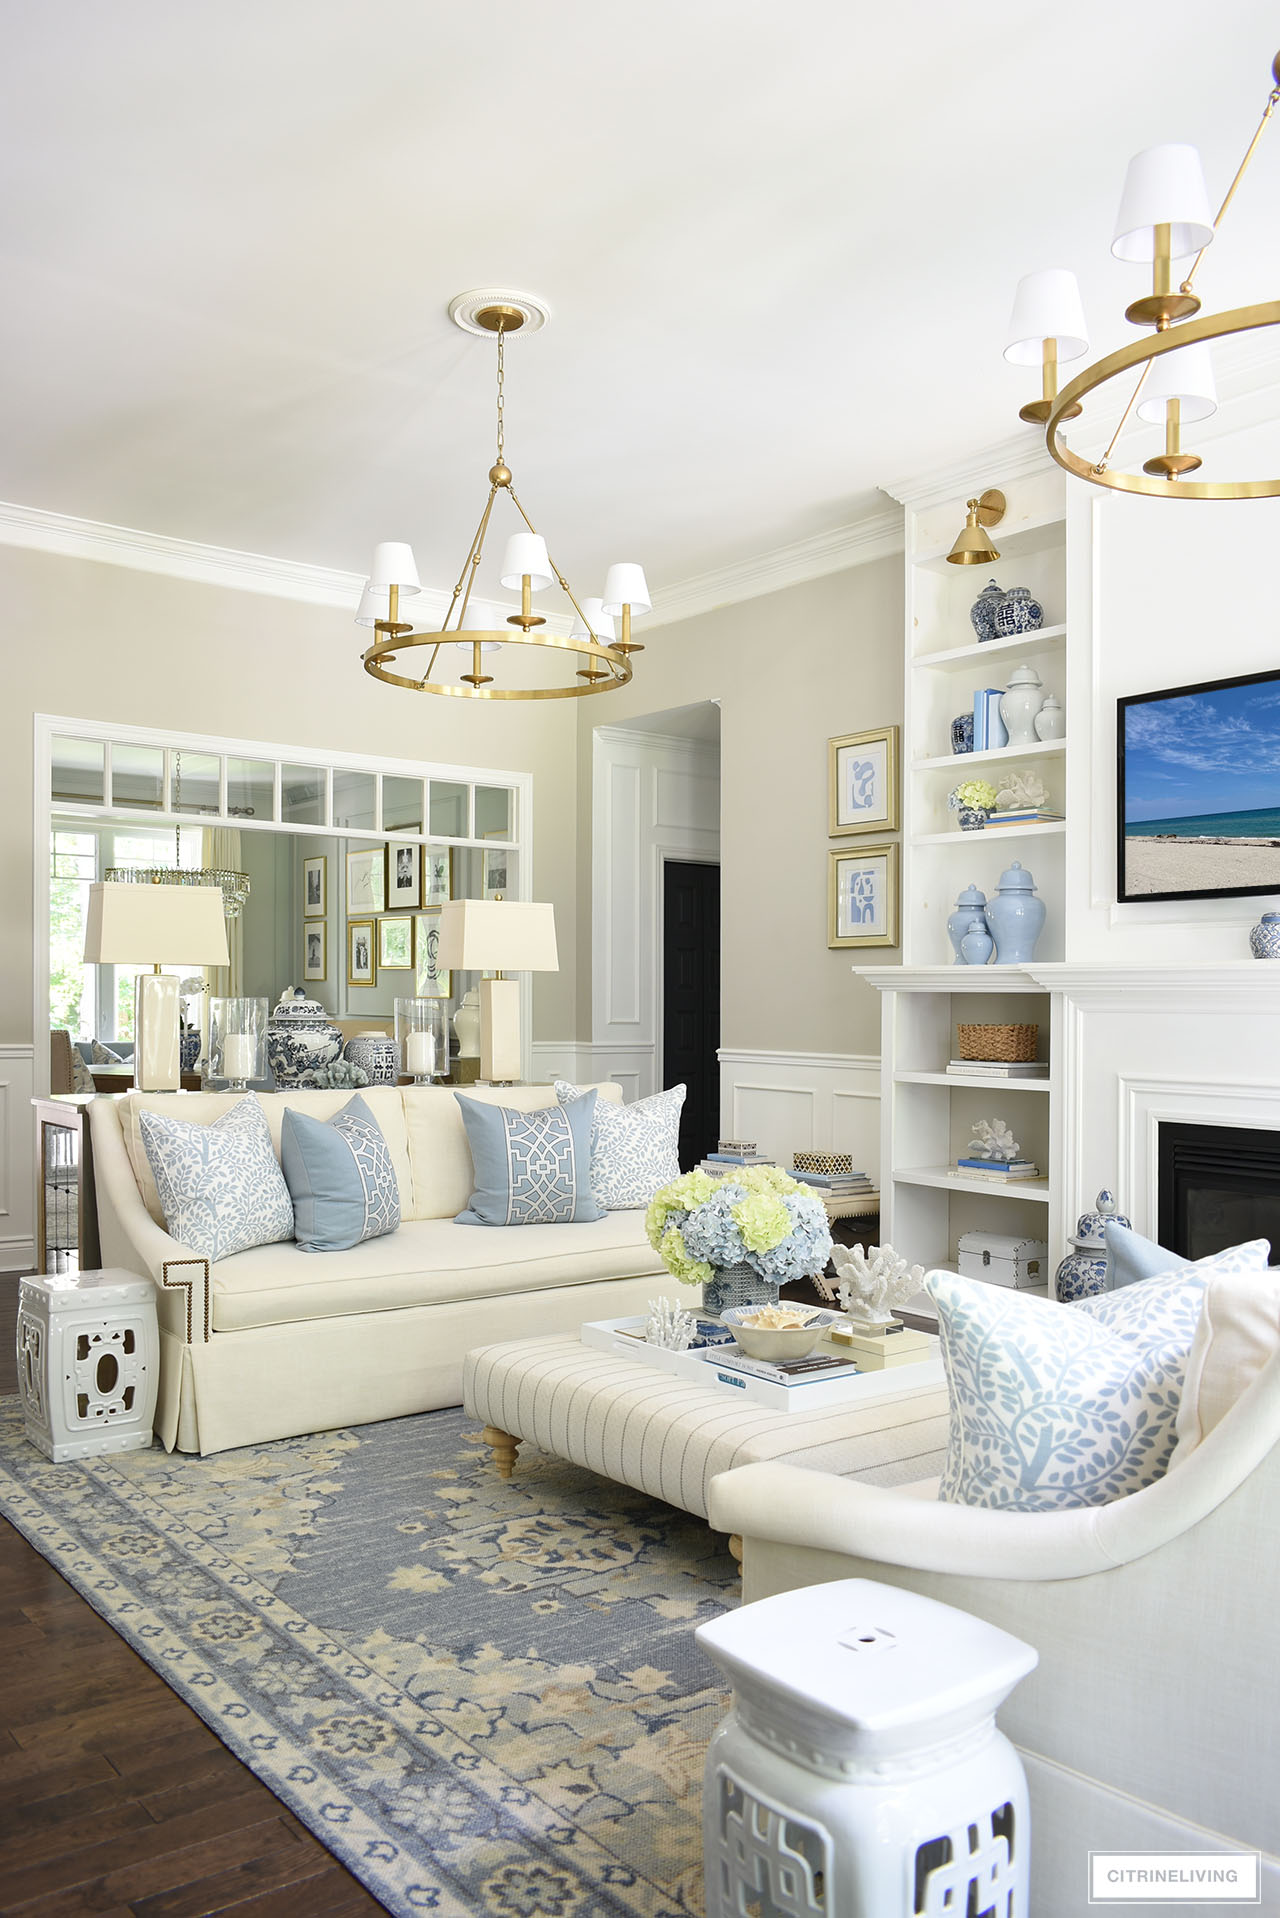 Beautiful living room decorated for summer with soft blues, warm whites, light green and blue hydrangeas and coastal accents.